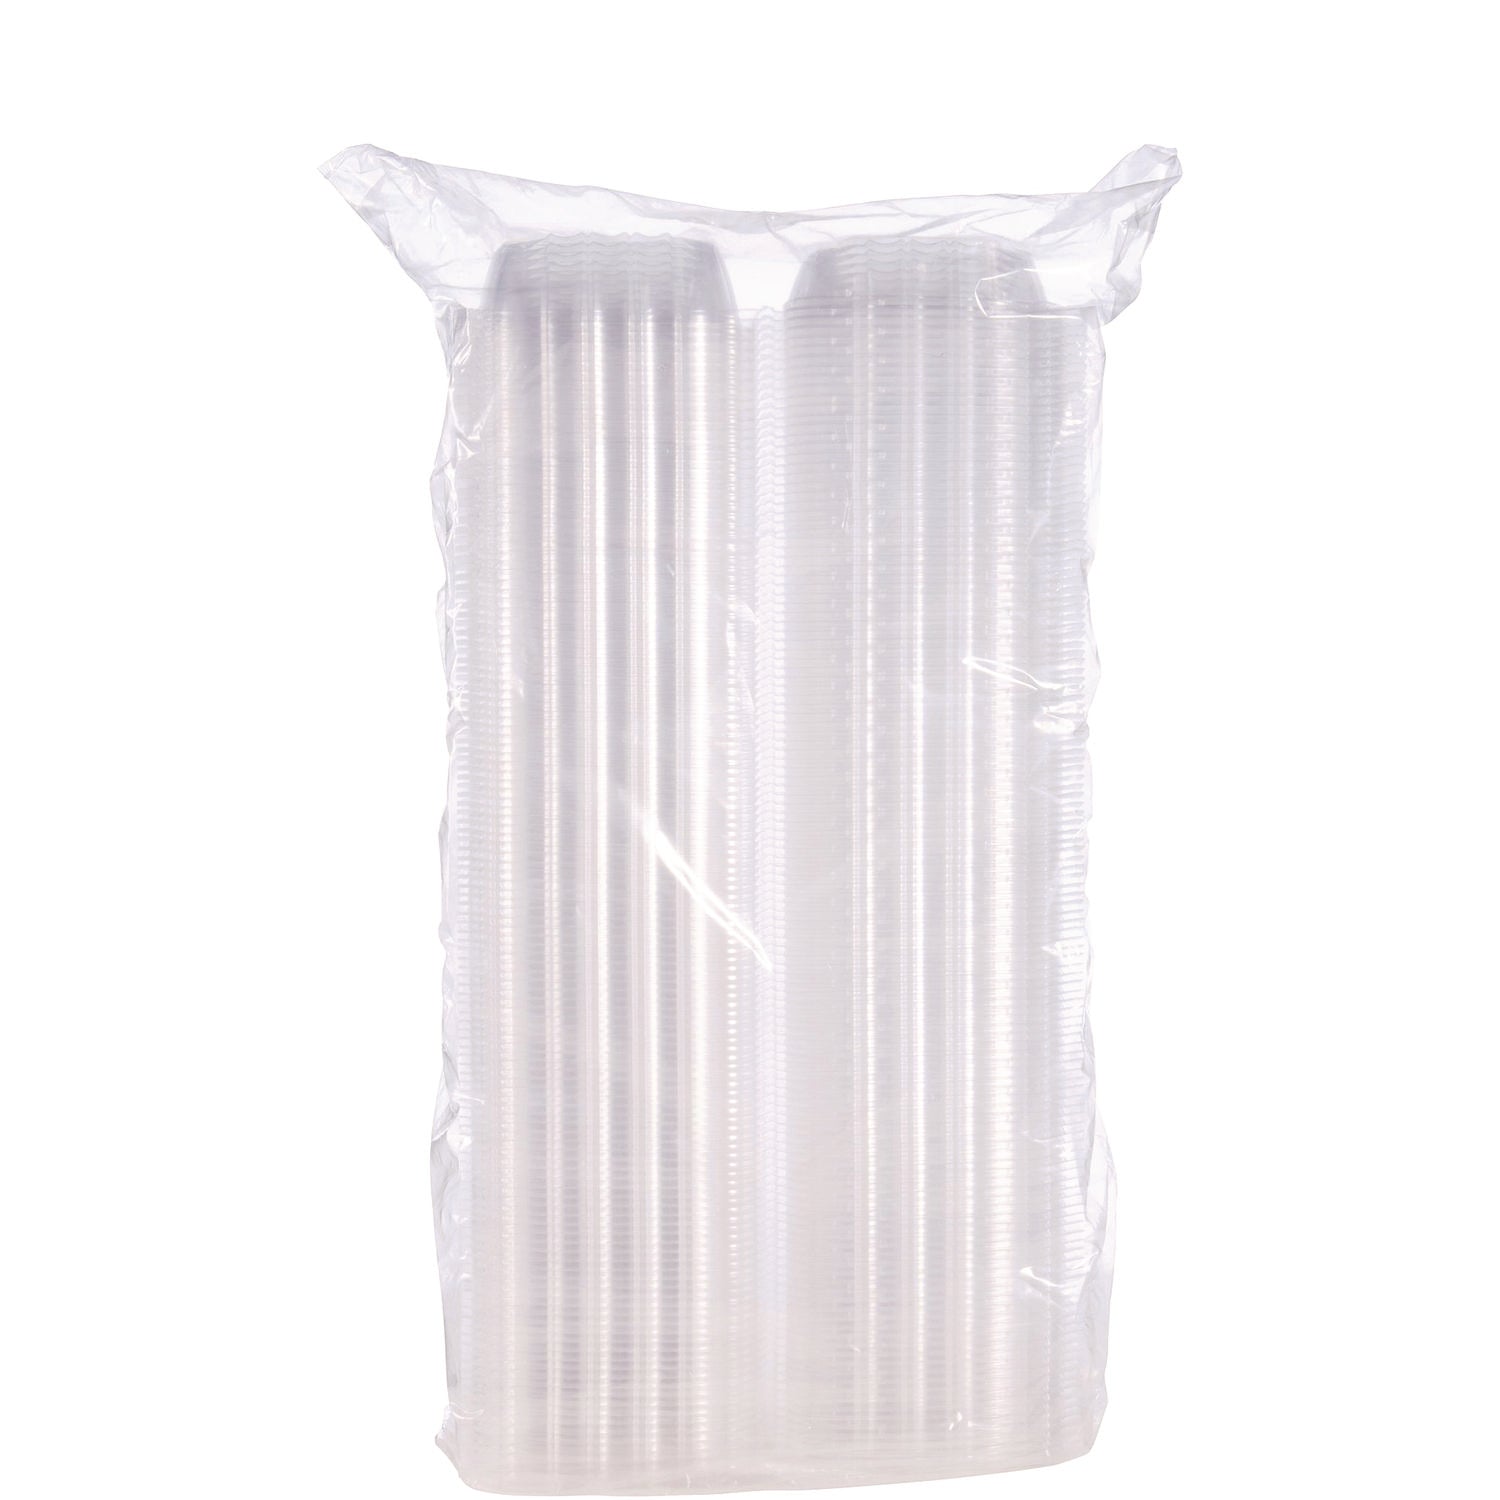 ClearSeal Hinged-Lid Plastic Containers, 5.8 x 6 x 3, Clear, Plastic, 125/Pack, 4 Packs/Carton - 